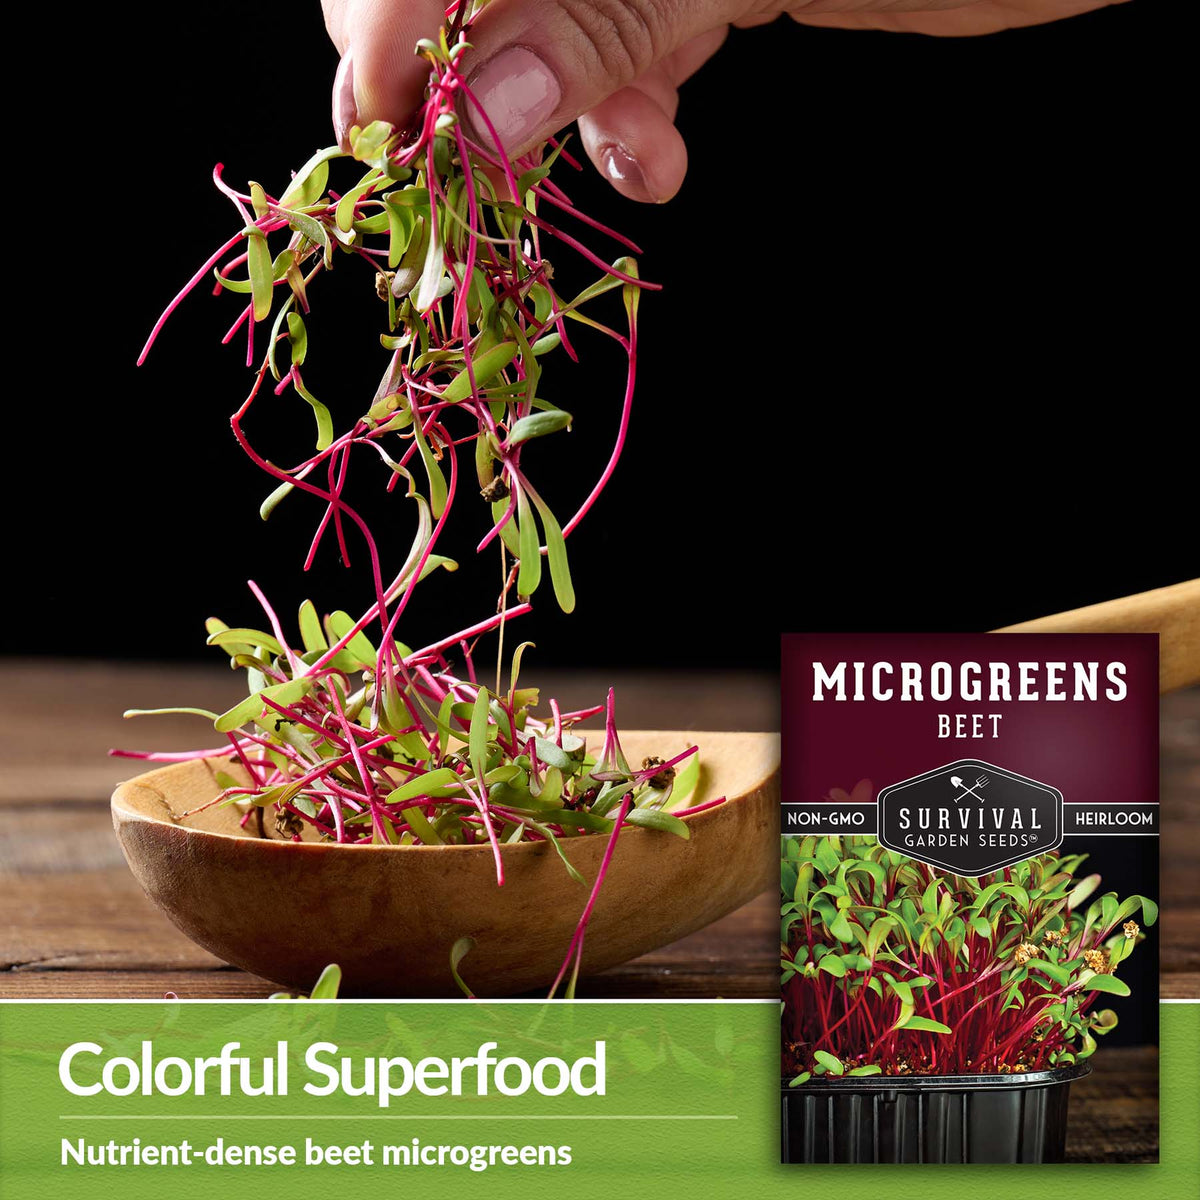 Beet Microgreens are a nutrient dense superfood